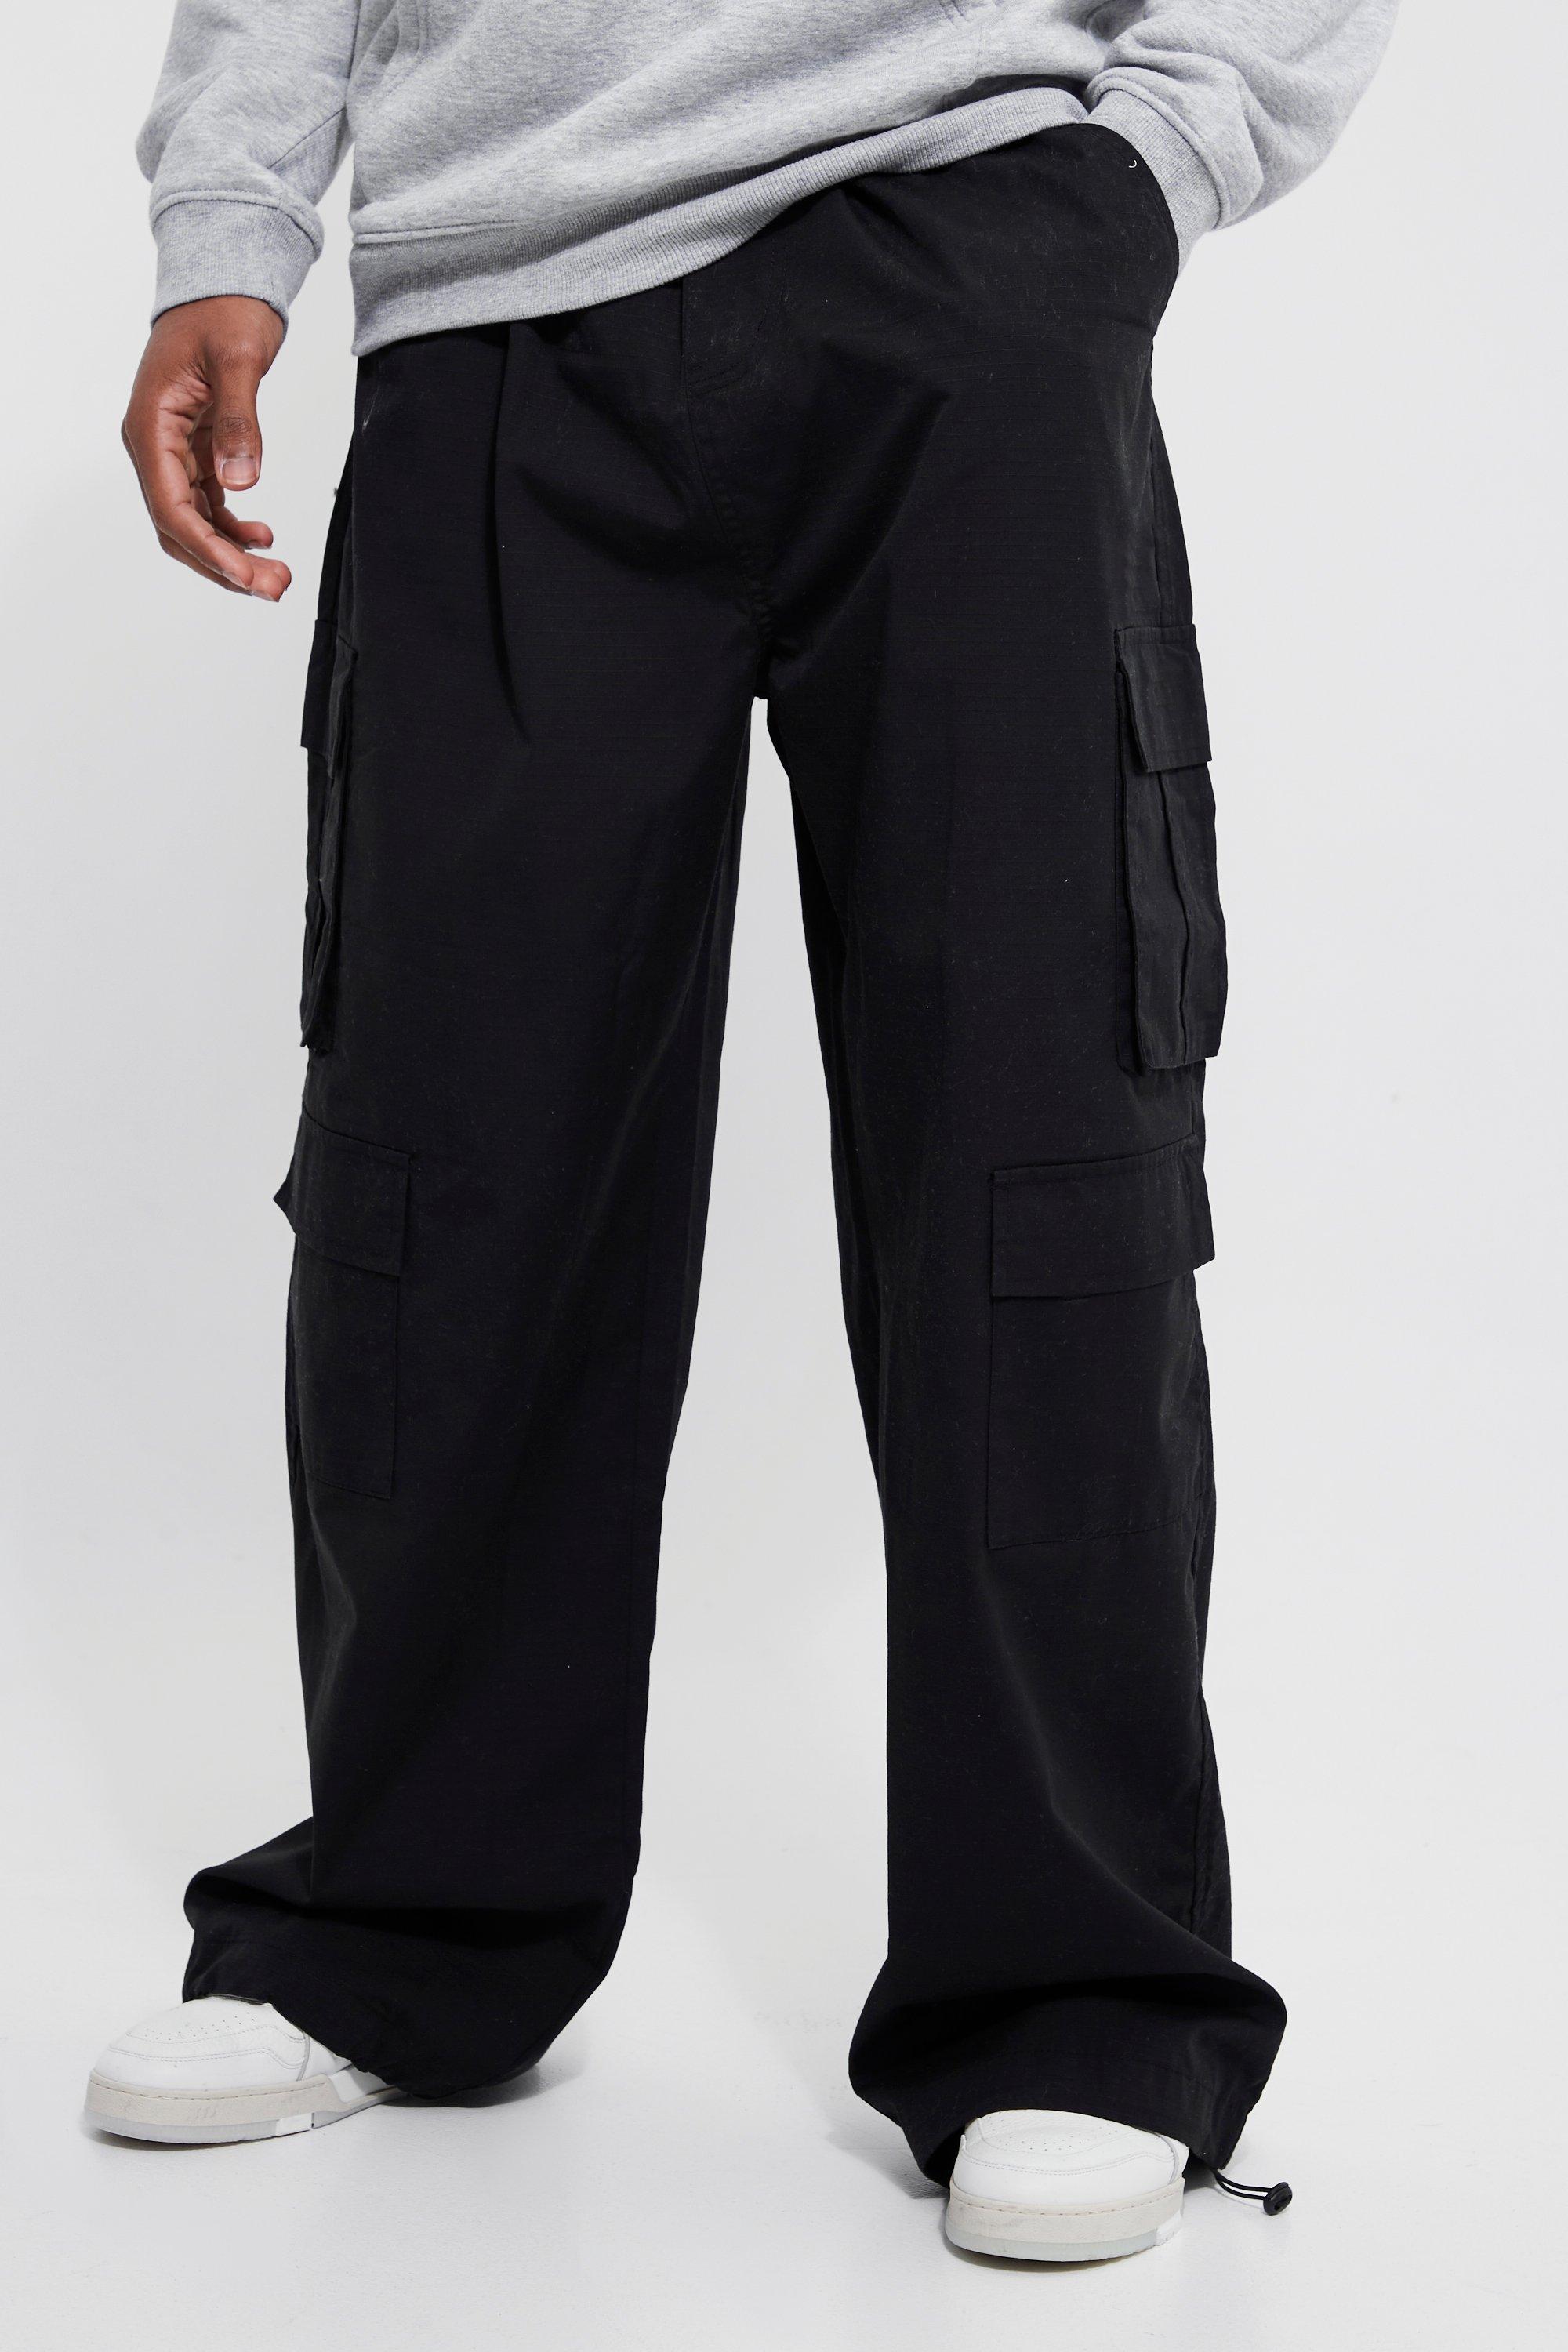 BoohooMAN Tall Parachute Ripstop Cargo Trouser in Black for Men | Lyst